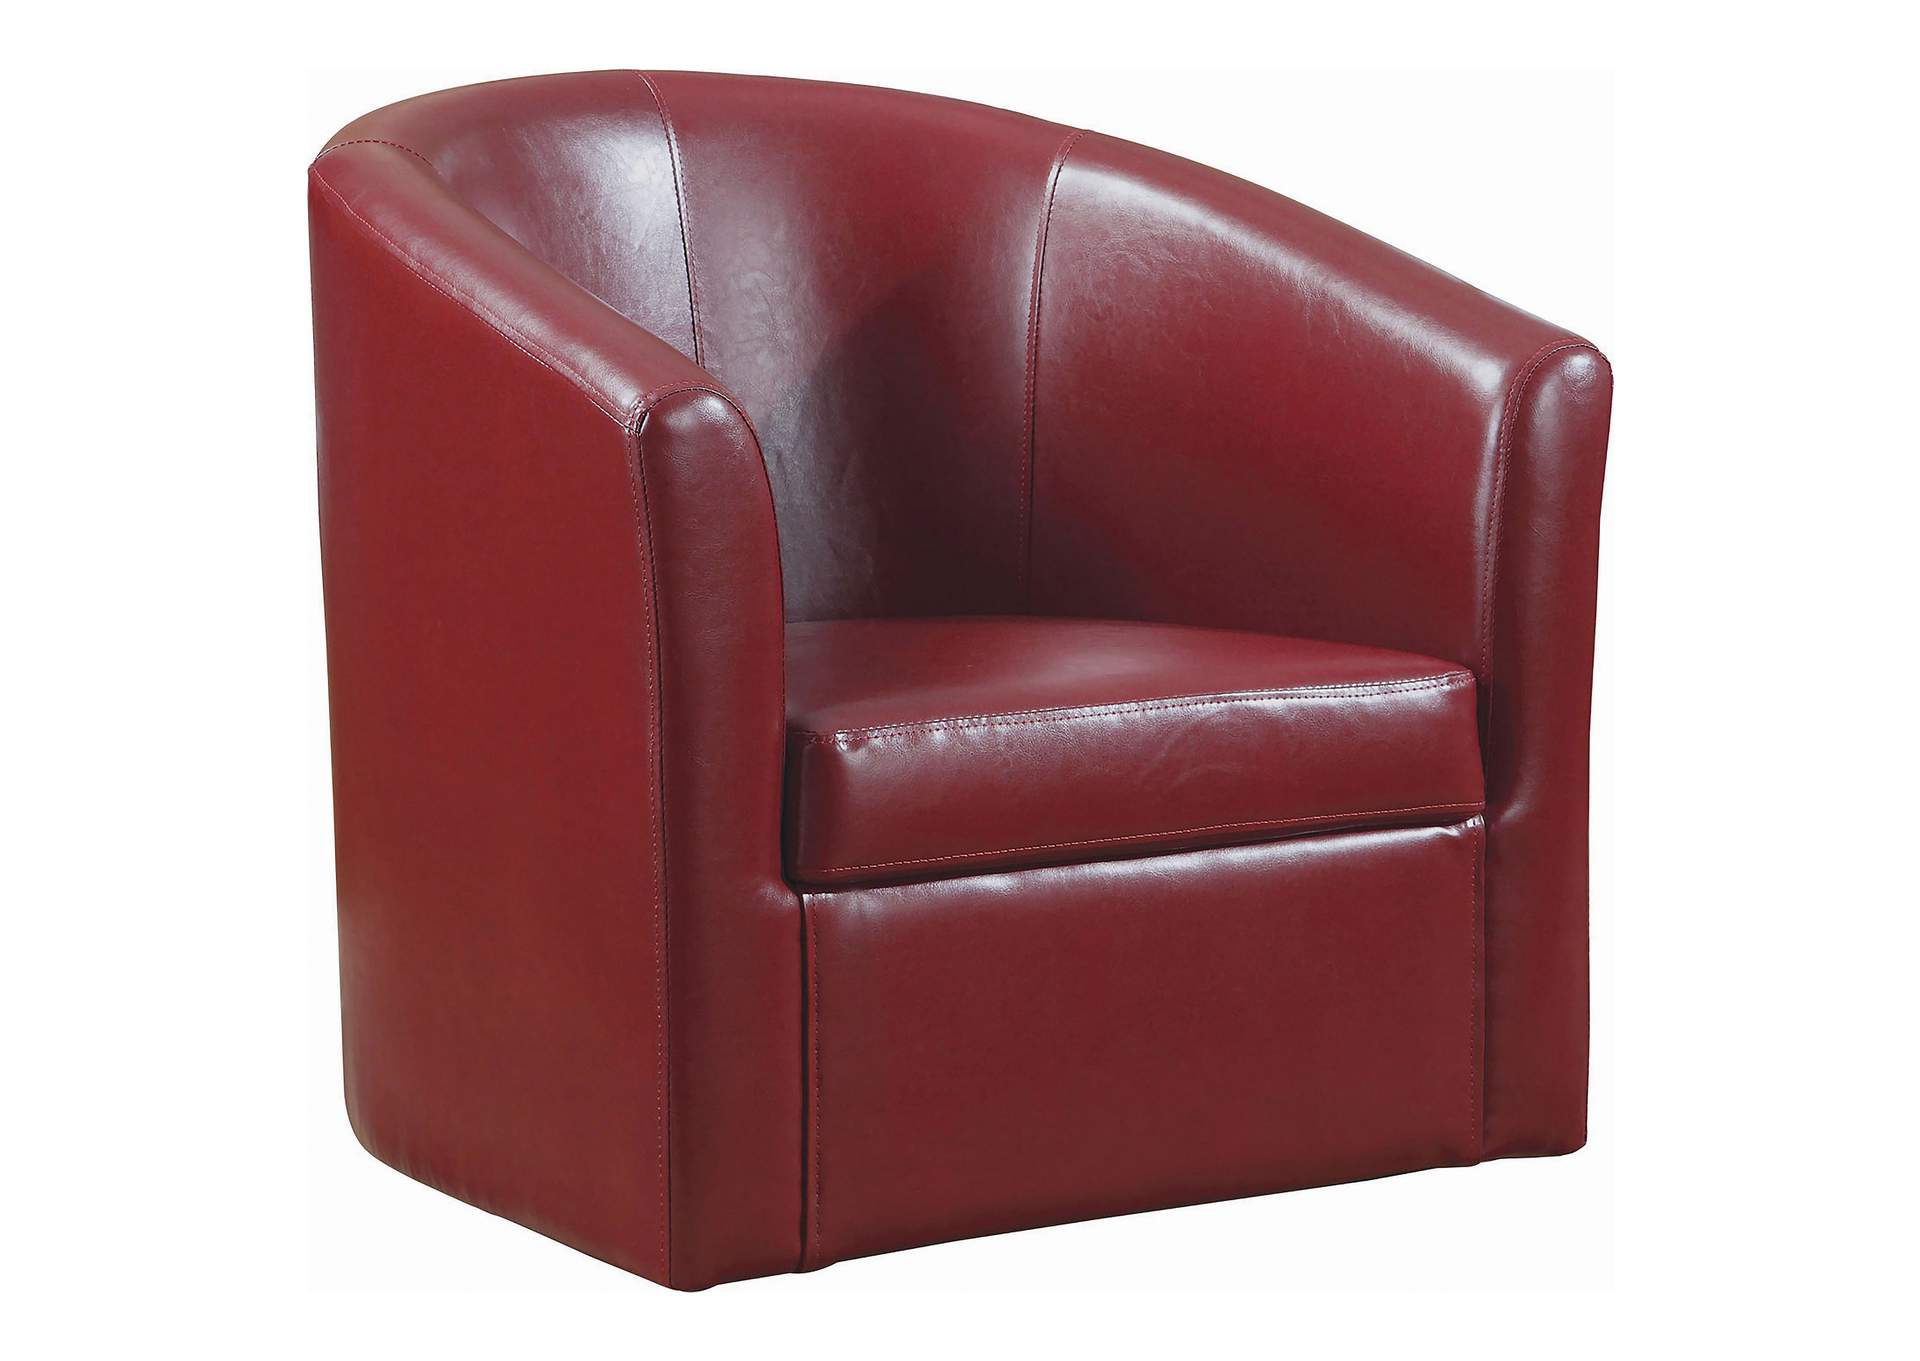 Turner Upholstery Sloped Arm Accent Swivel Chair Red,Coaster Furniture